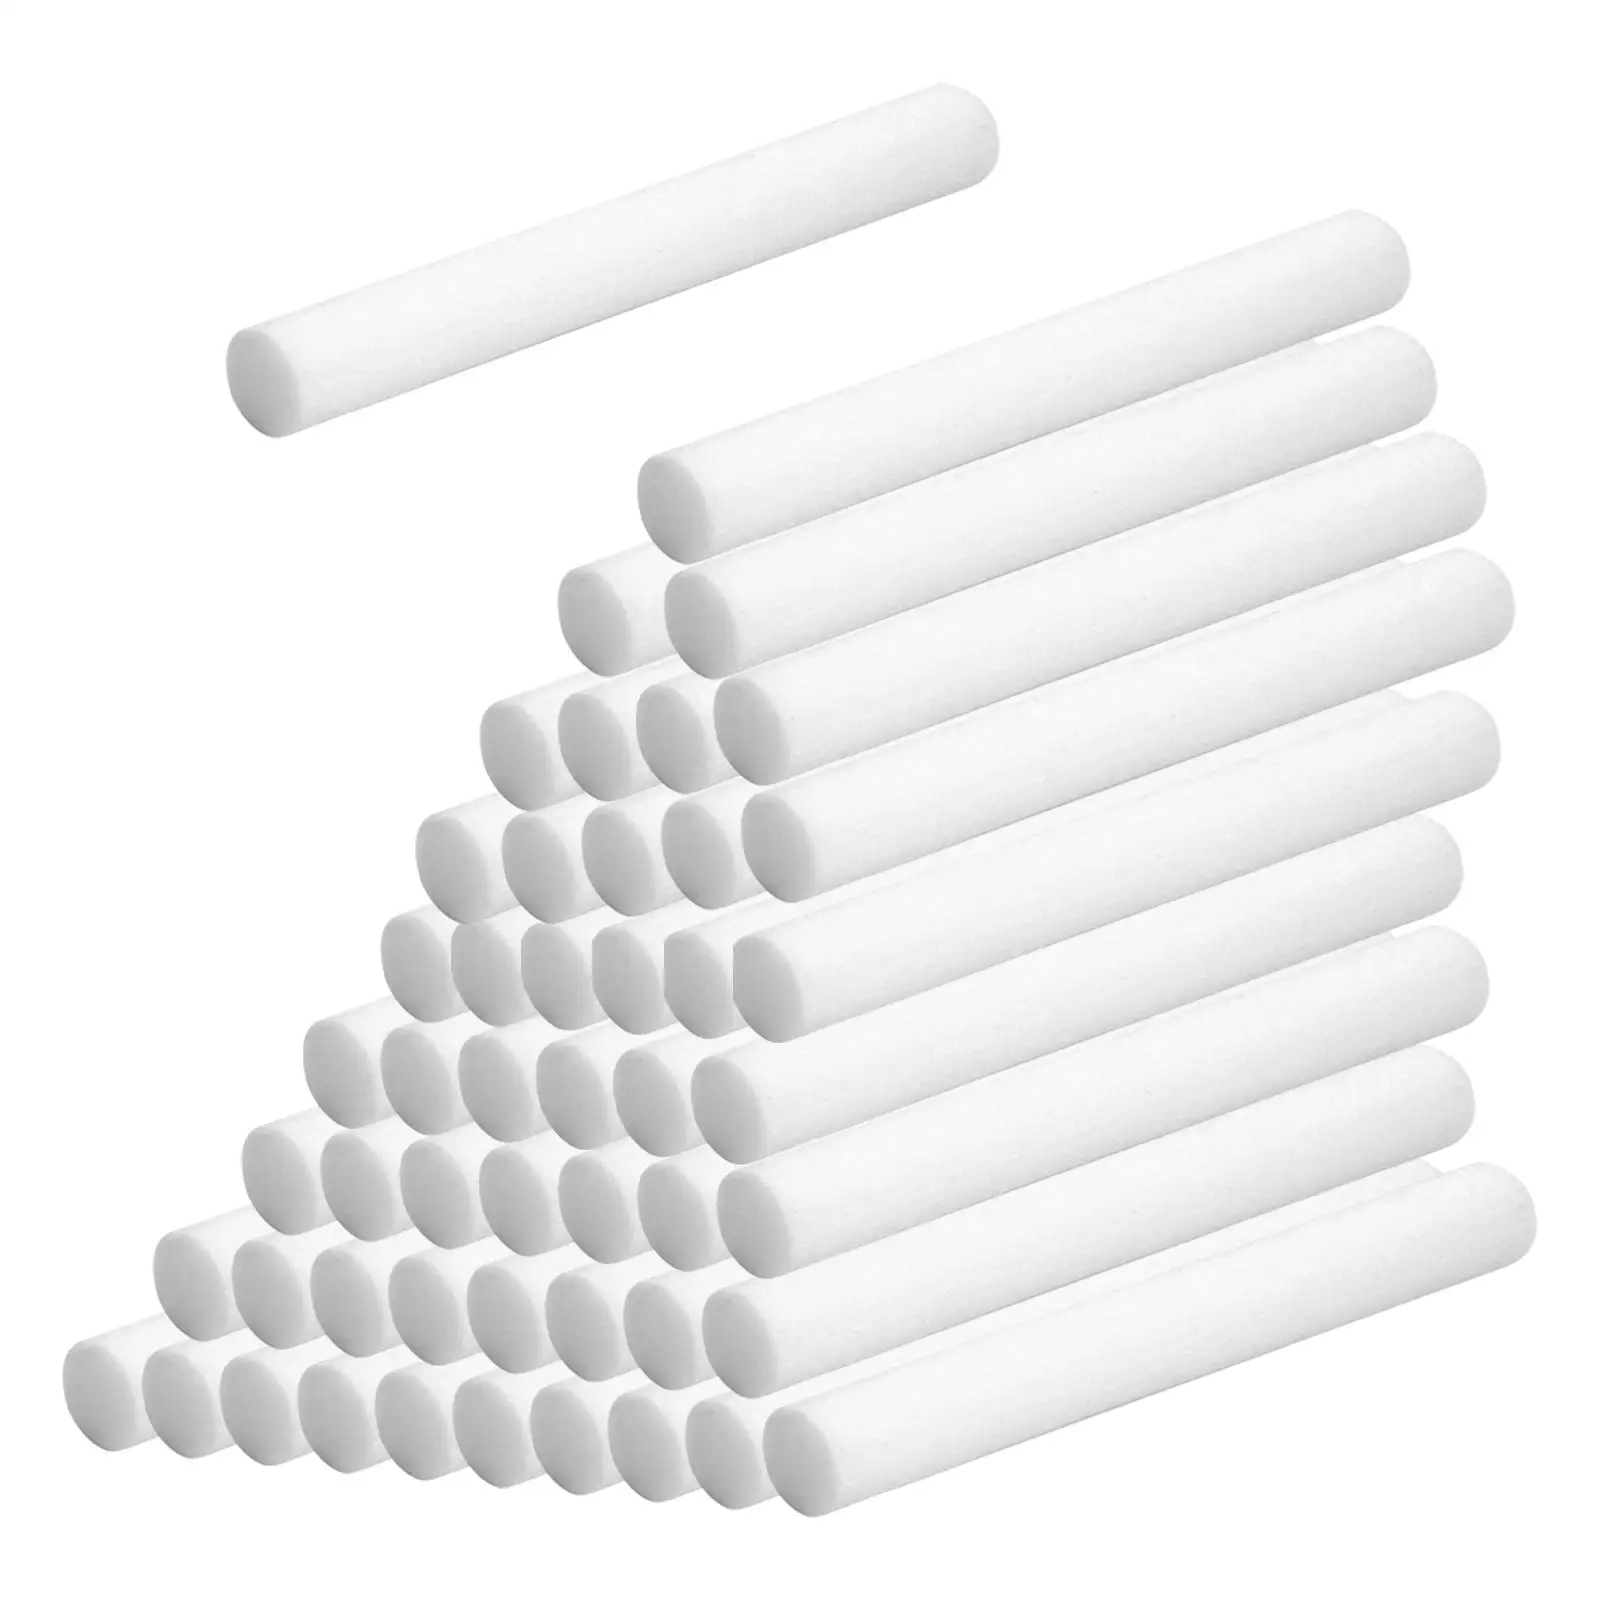 50 Pcs Humidifier Filter Swabs Portable Diffuser Swabs for Mini Humidifier